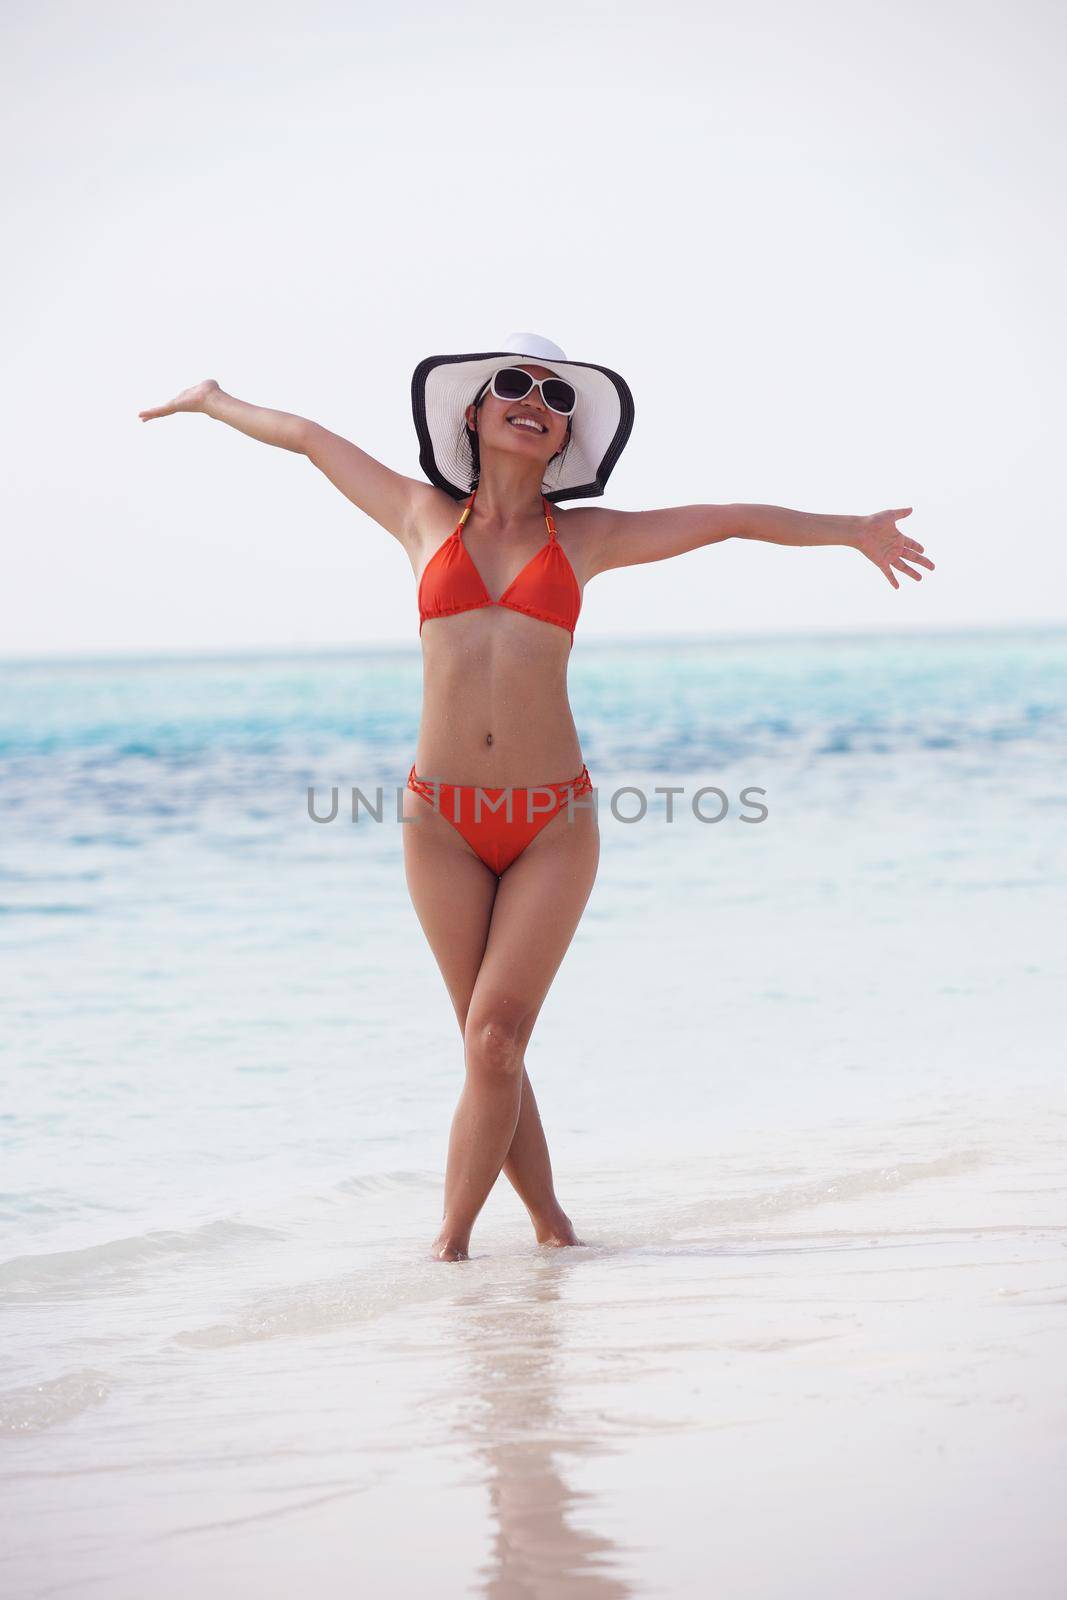 beautiful gril on beach have fun by dotshock